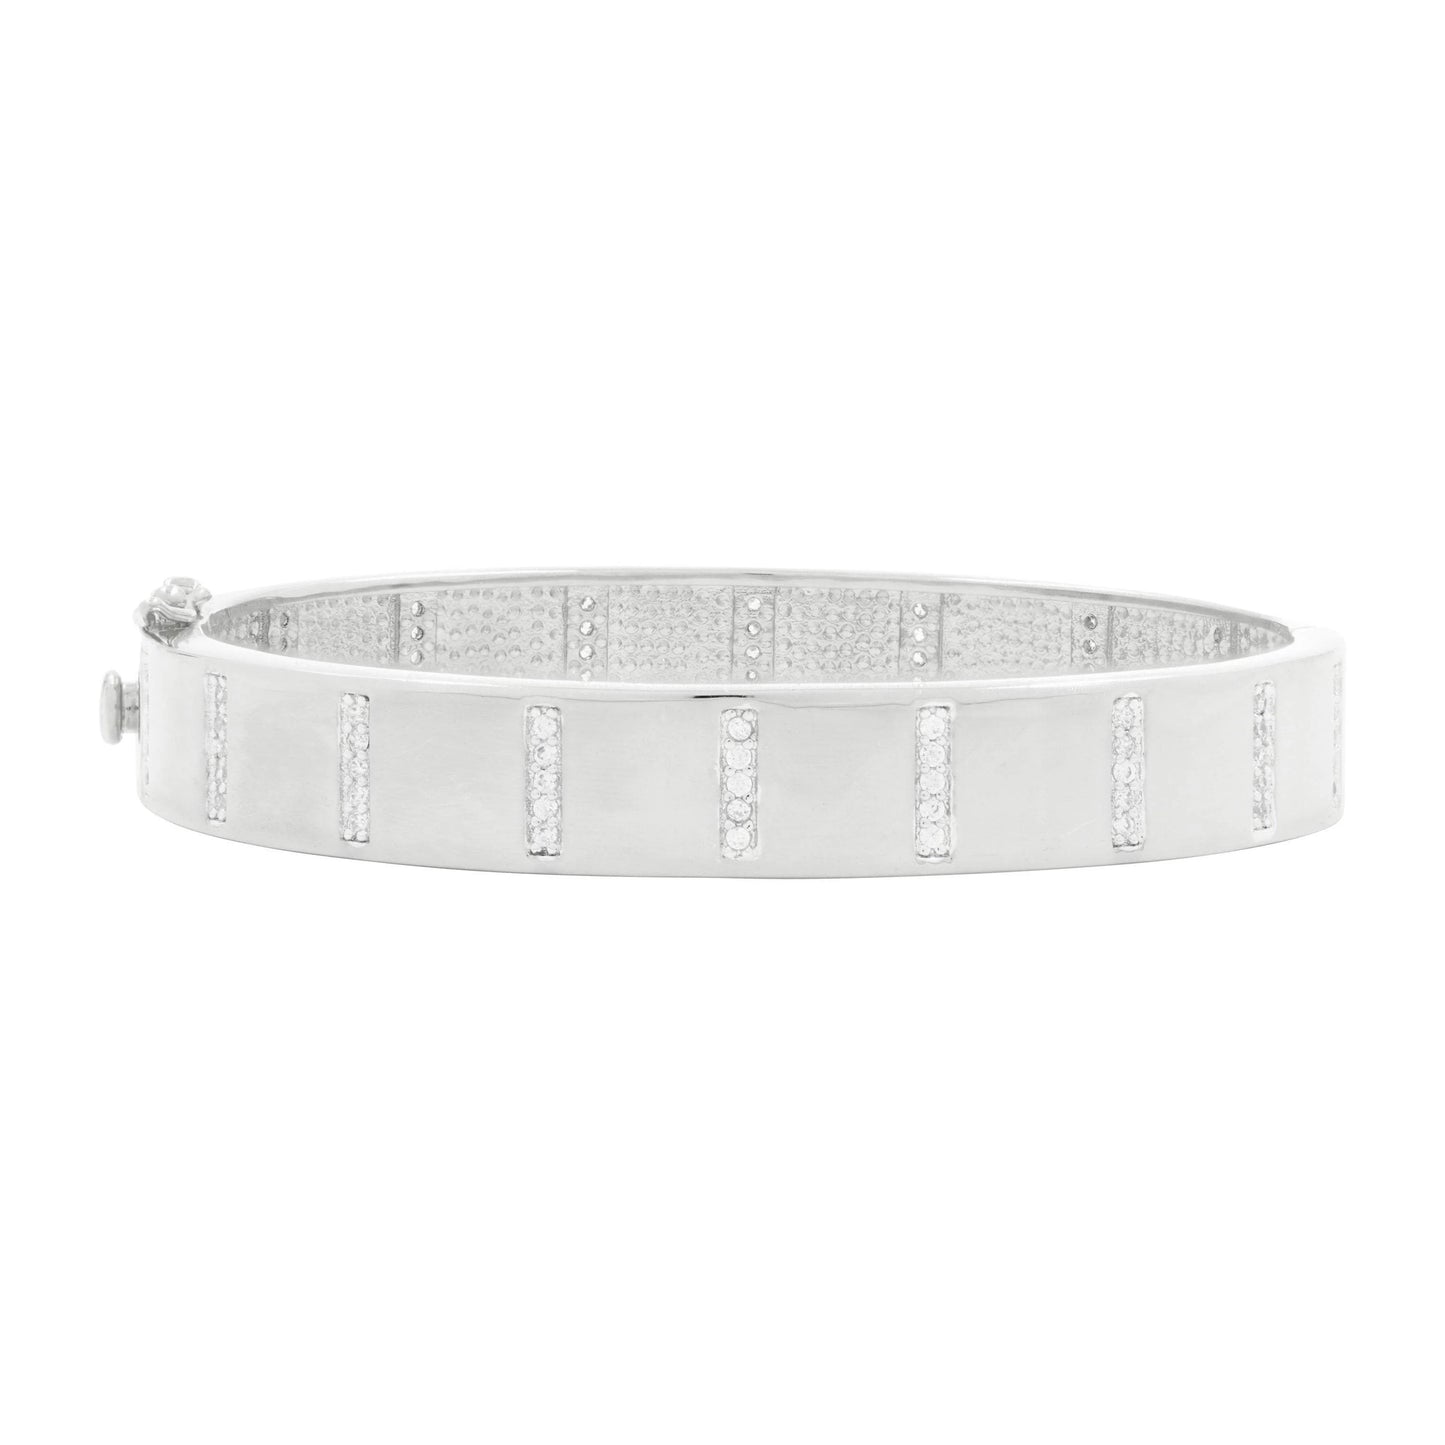 Radiance Wide Hinge Bangle in Silver